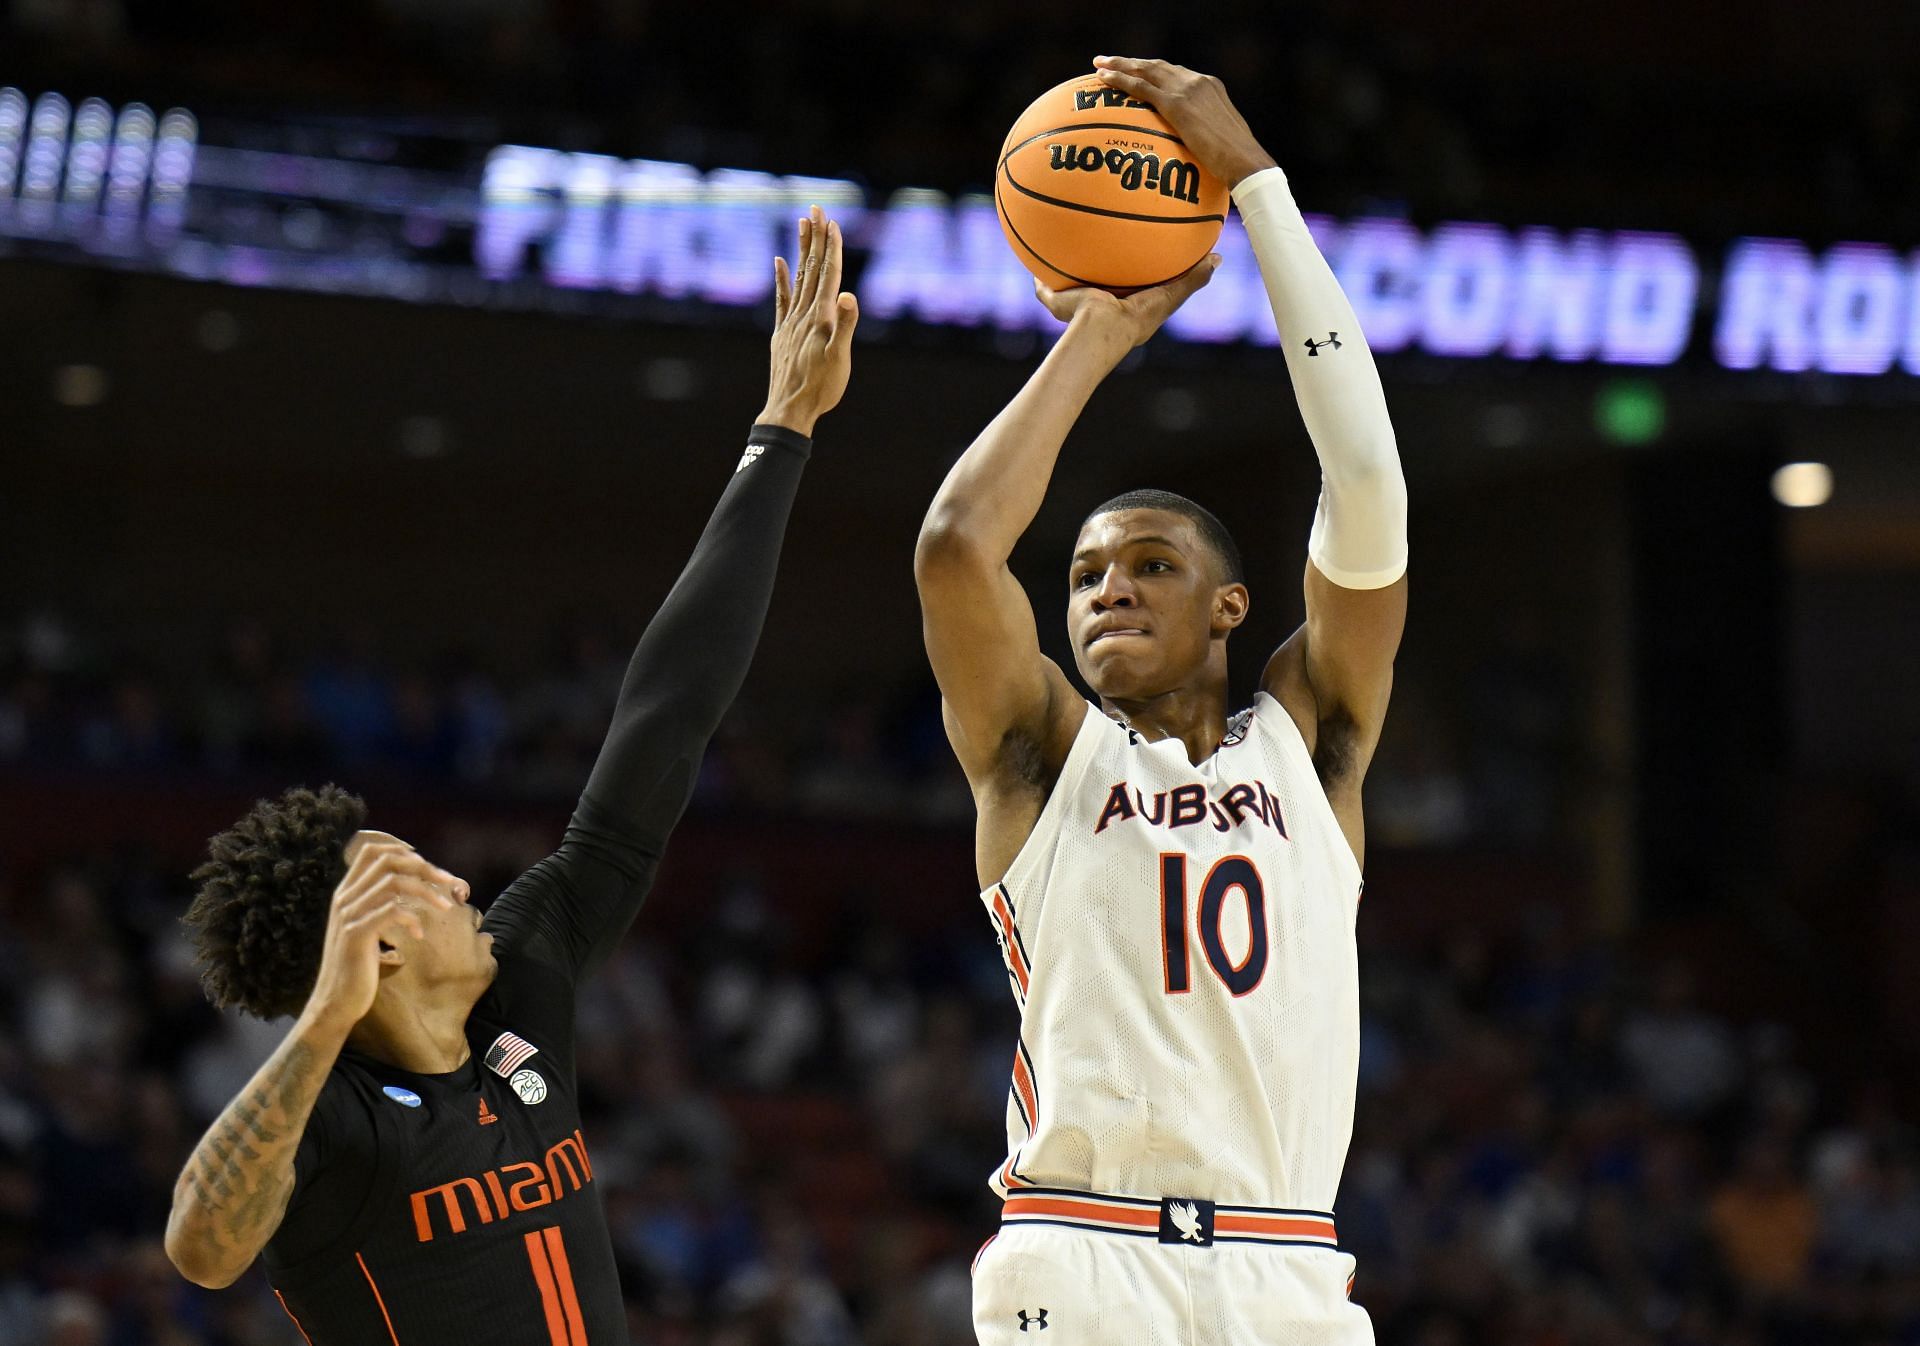 Auburn Tigers forward Jabari Smith Jr is projected to go first in the NBA Draft